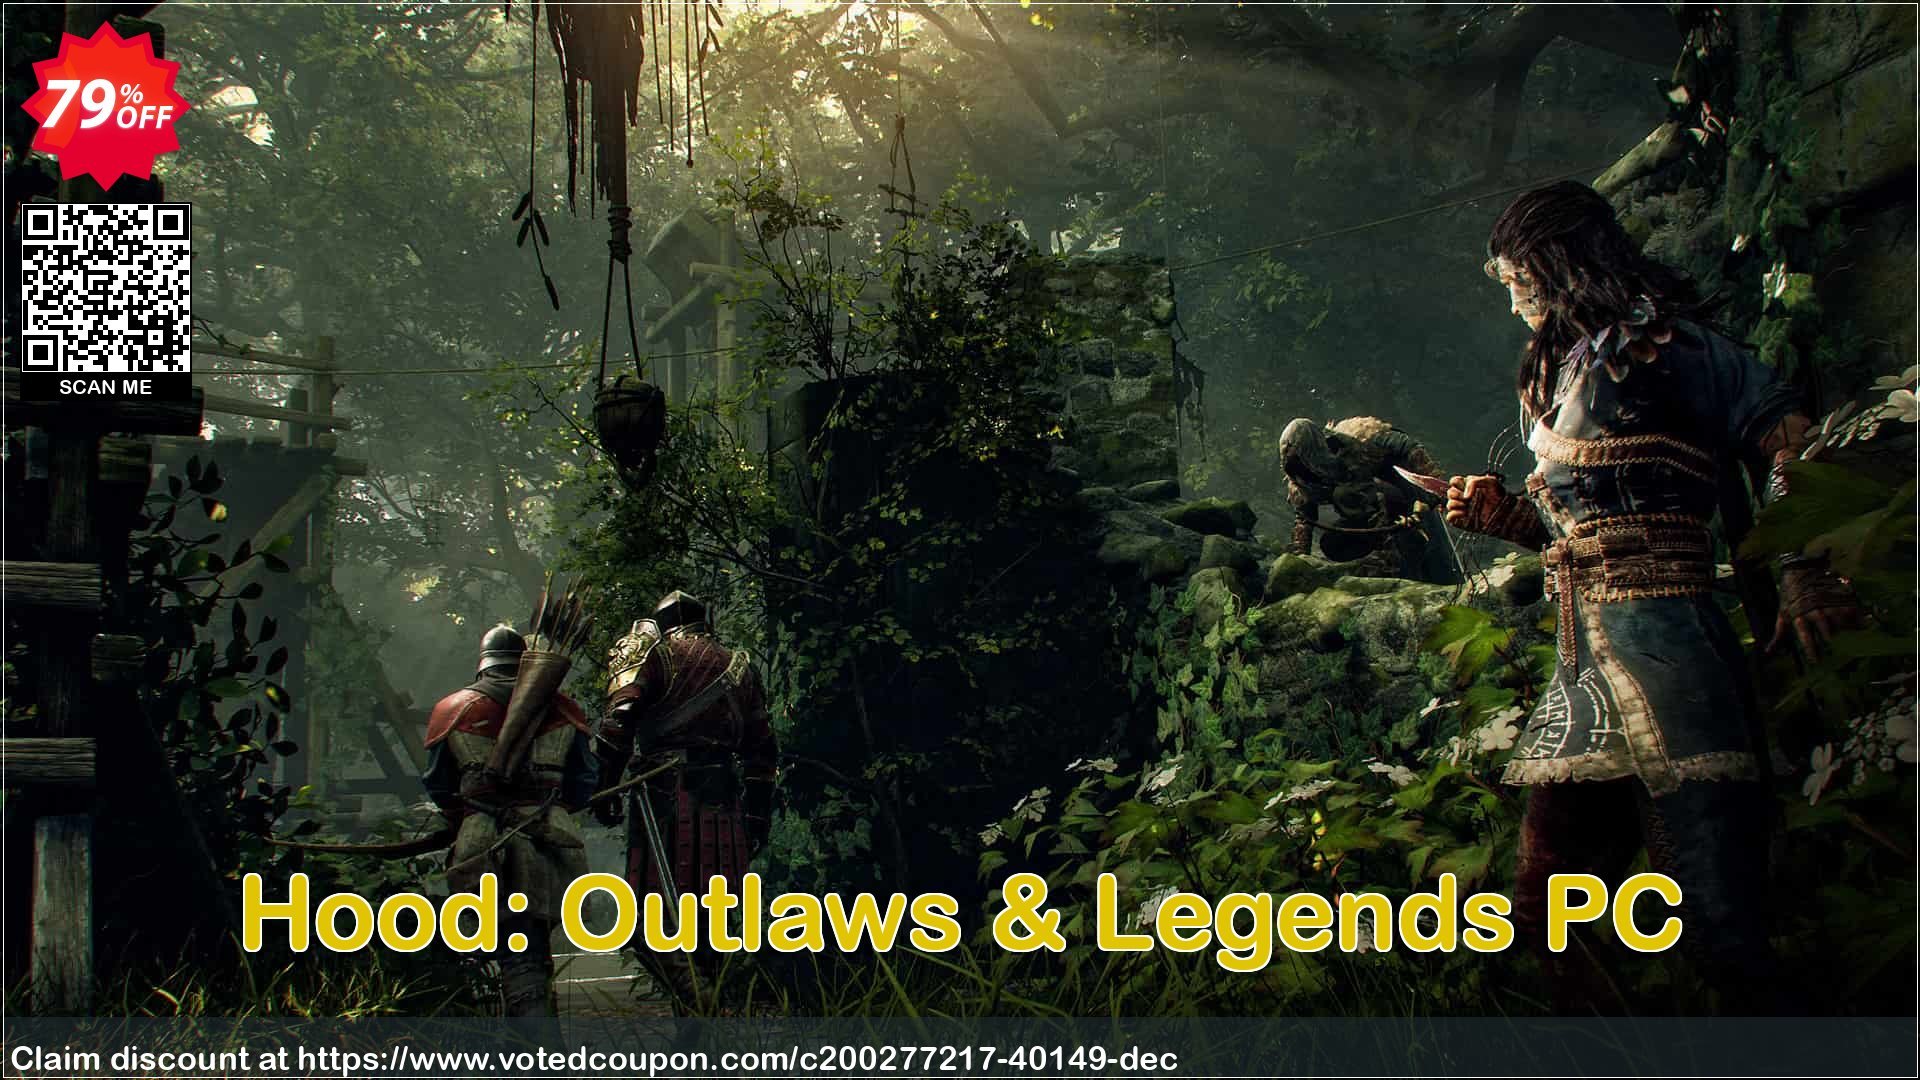 Hood: Outlaws & Legends PC Coupon Code May 2024, 79% OFF - VotedCoupon